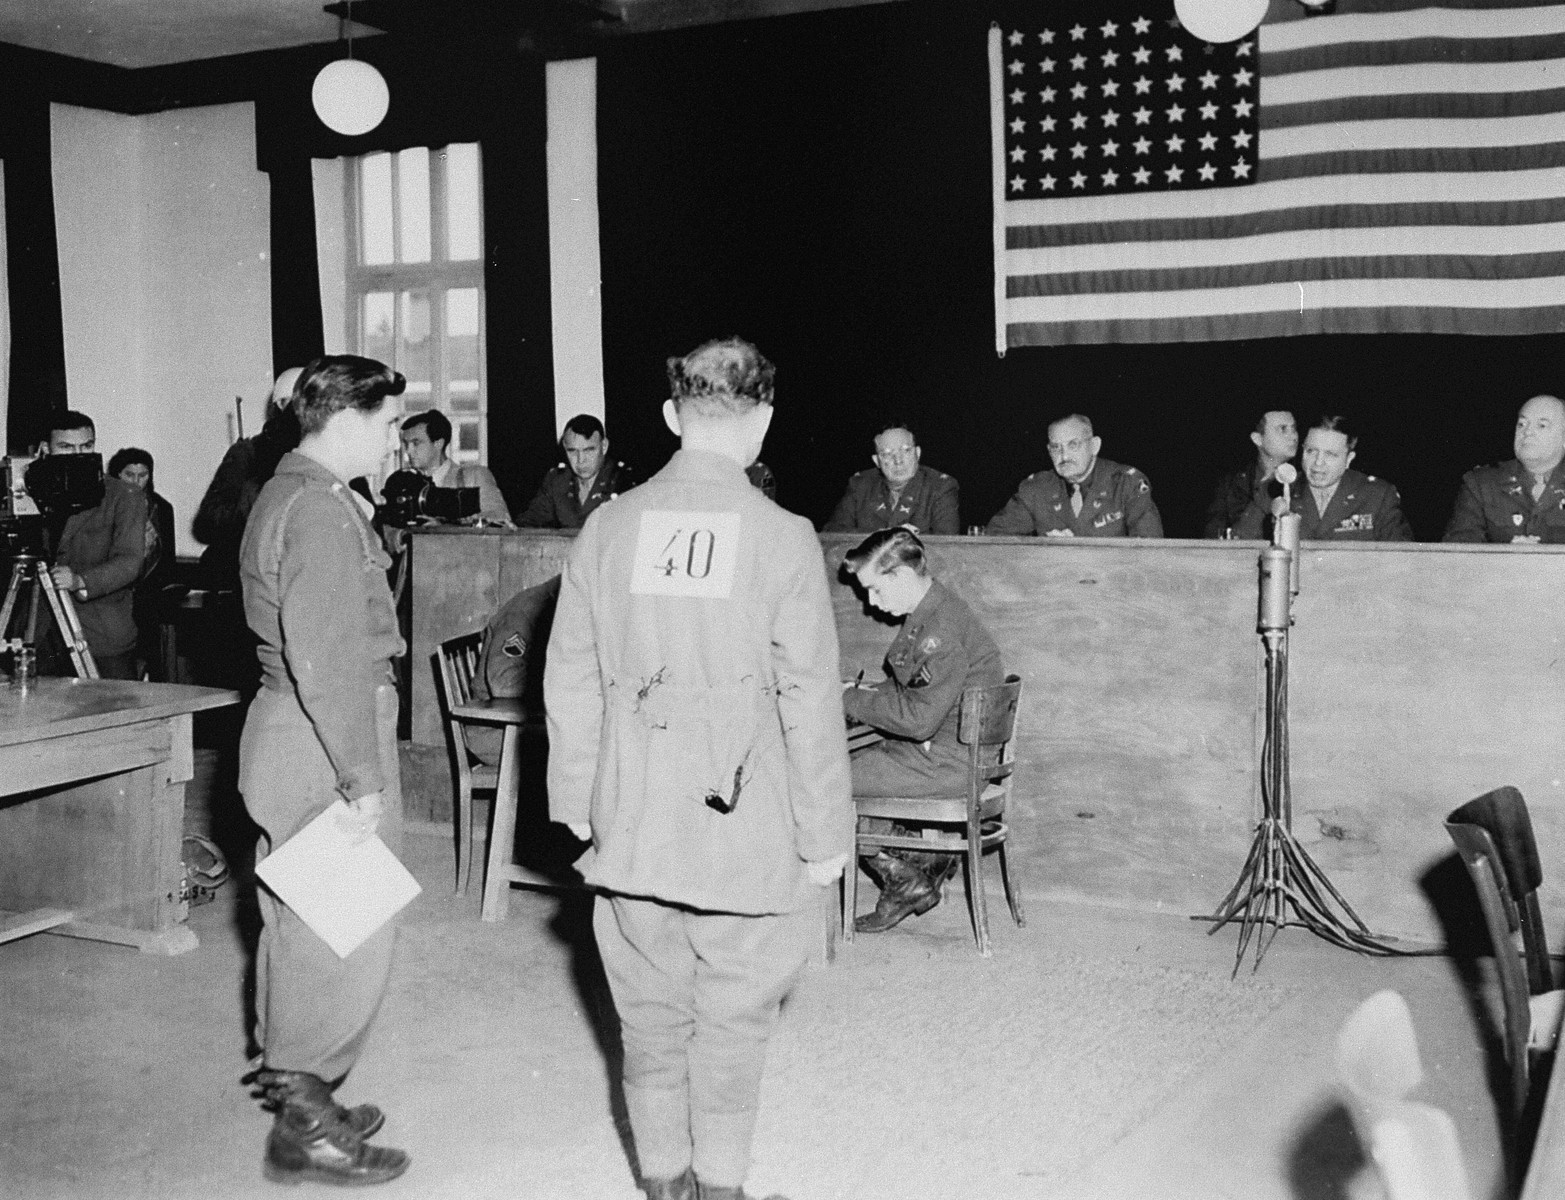 Former SS-Sturmbannfuehrer Friedrich Weitzel, the officer in charge of food and clothing distribution in Dachau, is sentenced to death by hanging by the American military tribunal hearing the trial of former camp personnel and prisoners from Dachau.